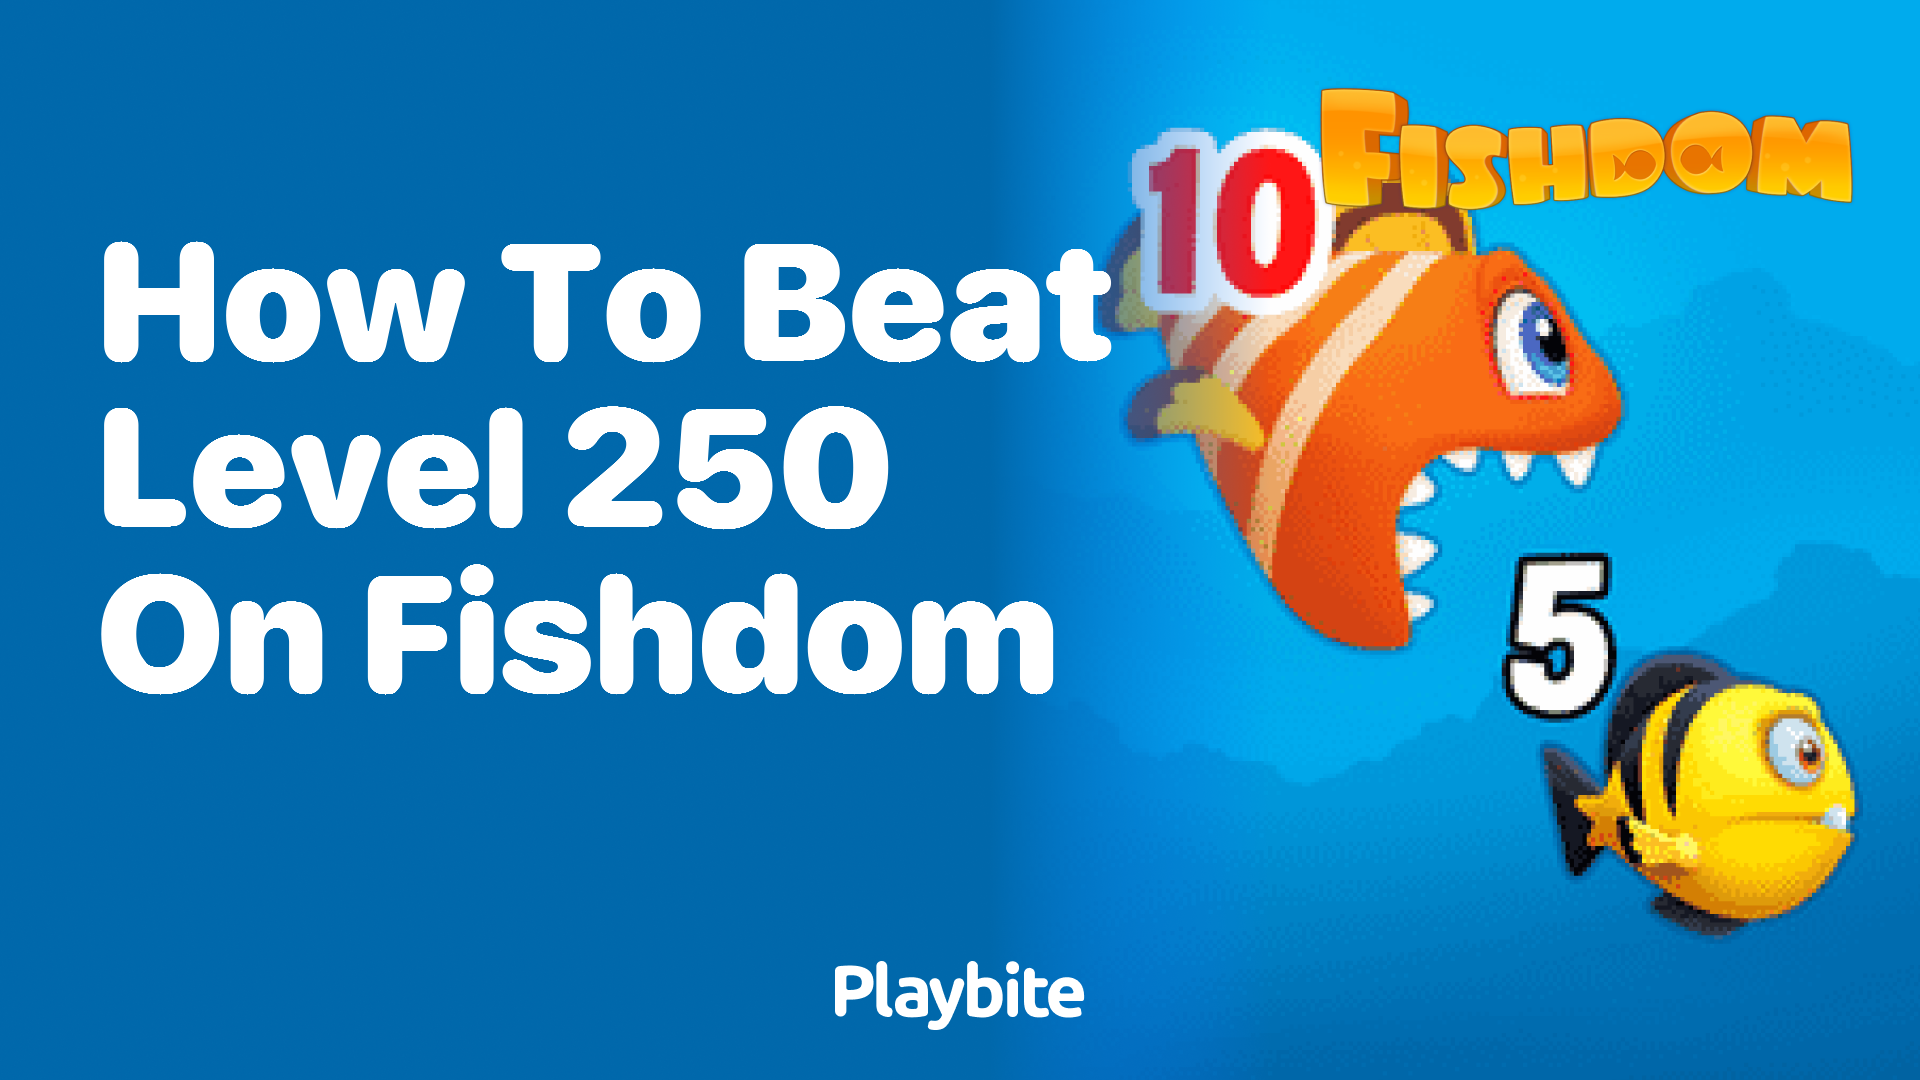 How to Beat Level 250 on Fishdom